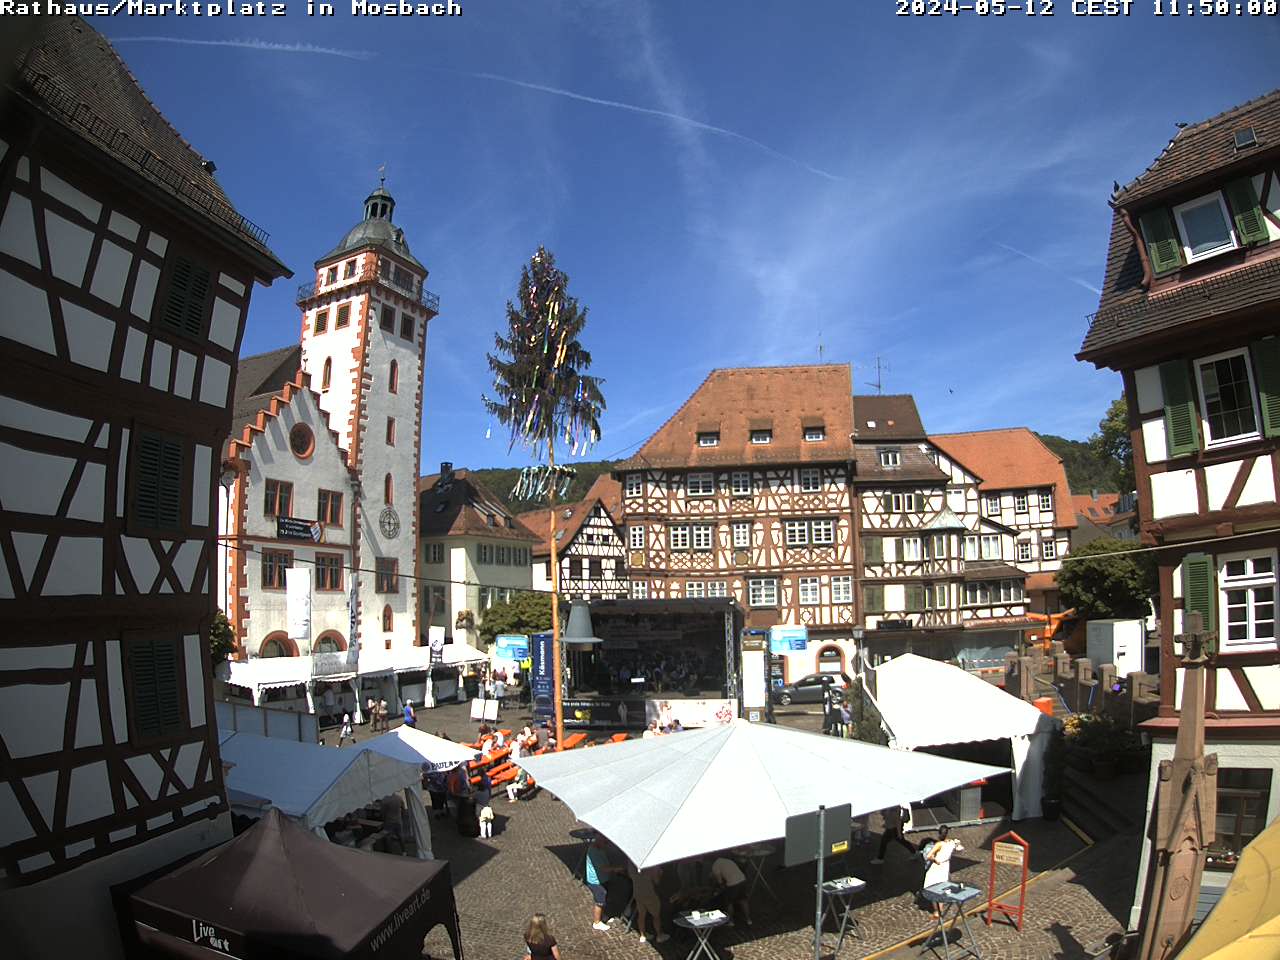 Mosbach Fre. 11:54